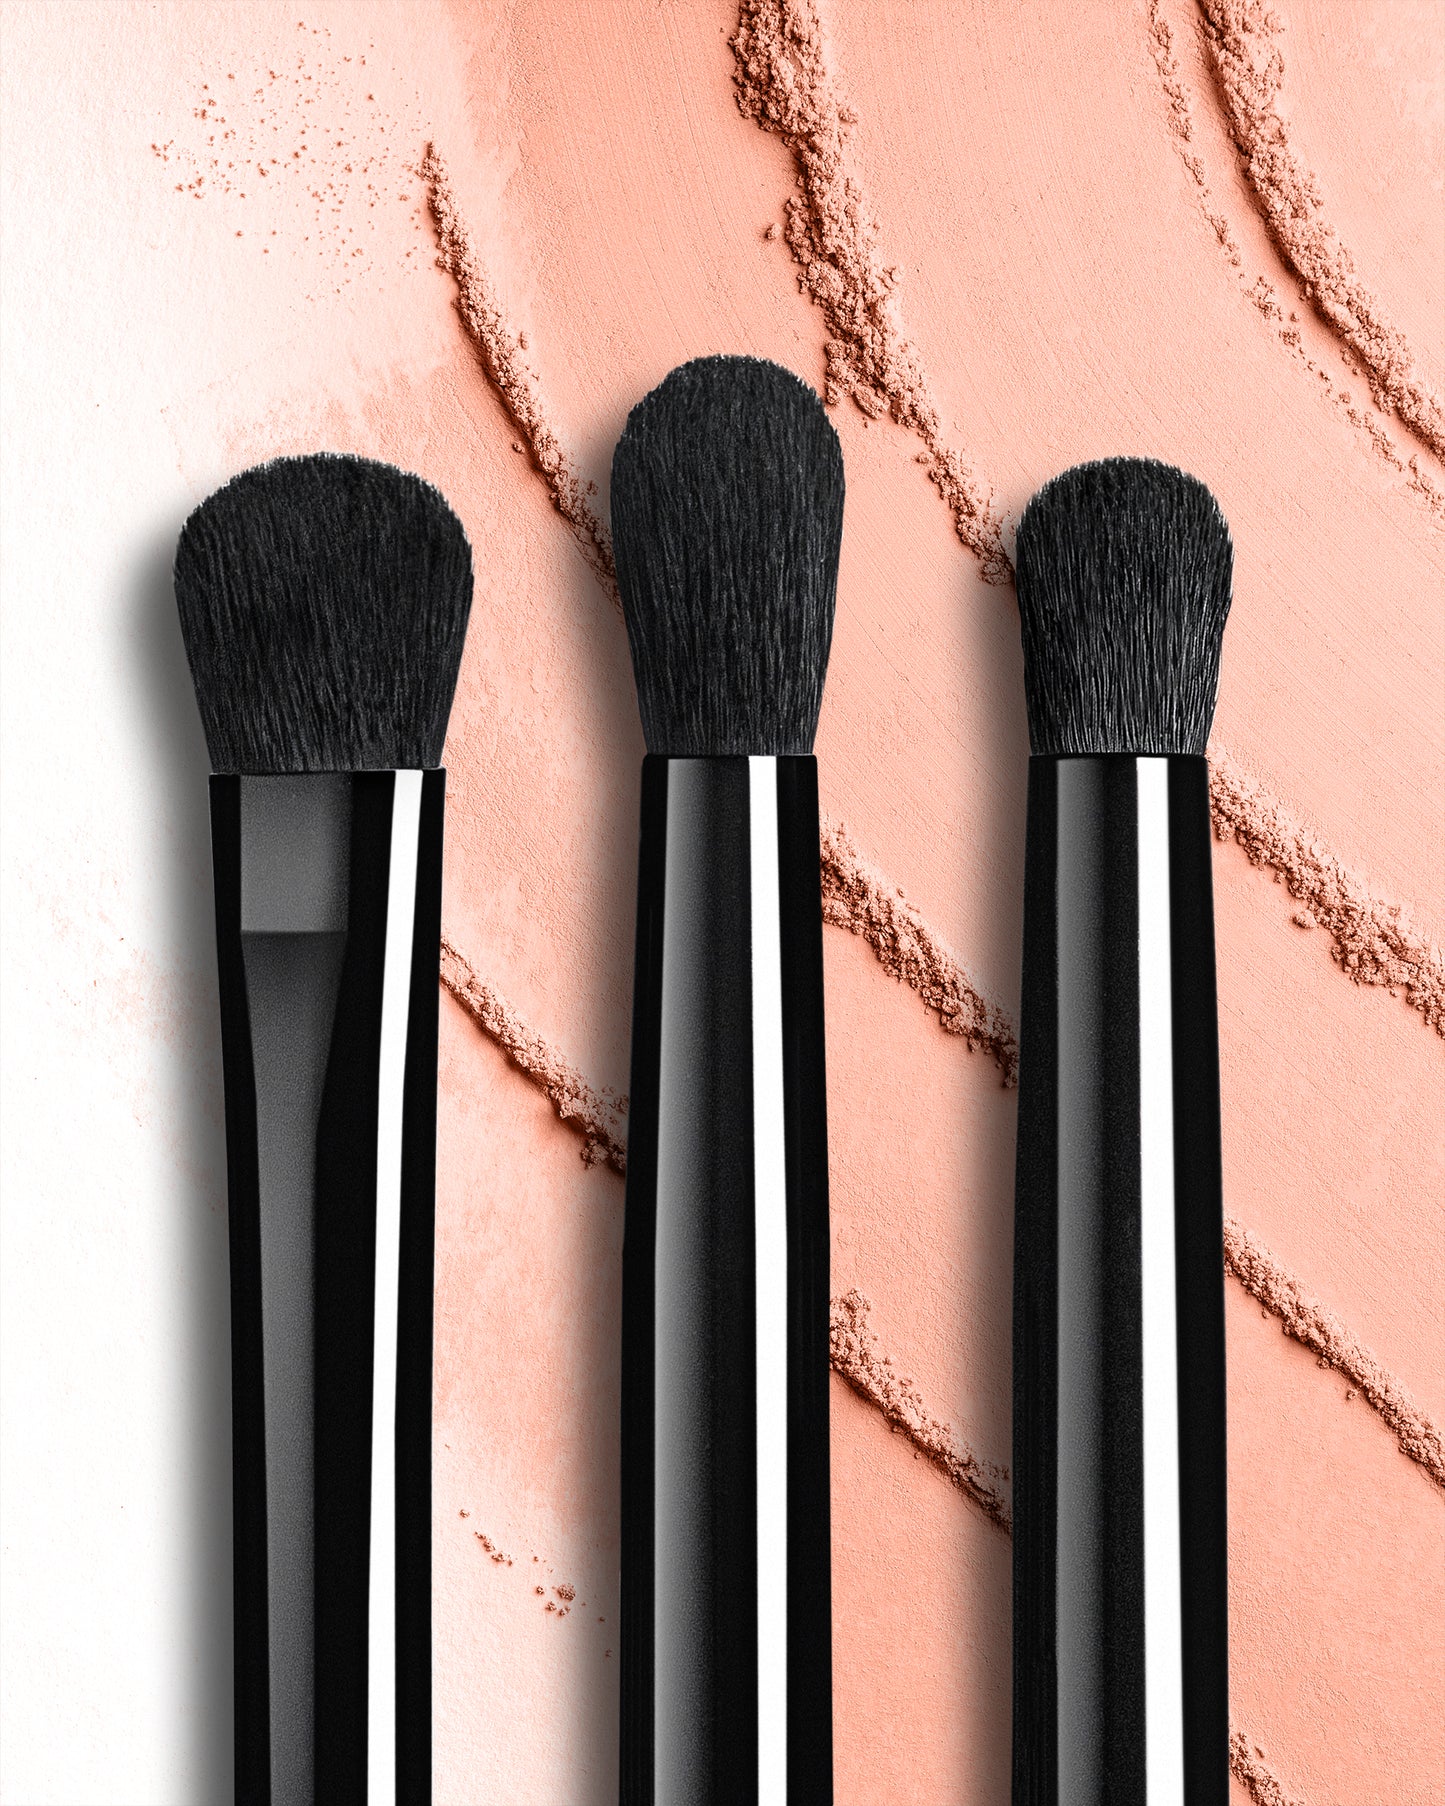 2022 STUDIO COLLECTION 11 BRUSHES SET